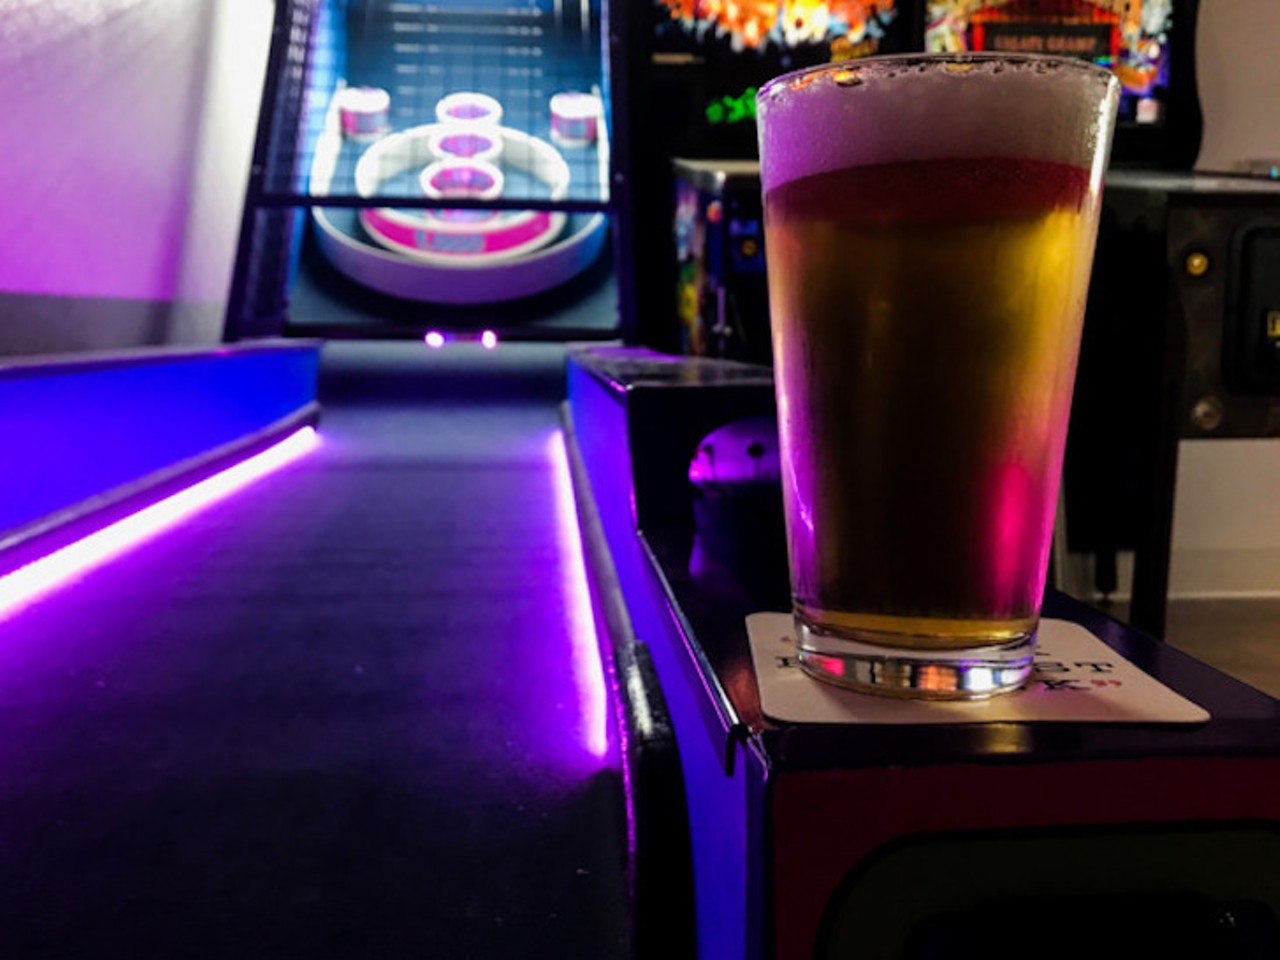 GenX Tavern   
103 E. Jackson St., Tampa, 813-694-7001
Opened back in April, this &#145;80s &#145;90s themed barcade offers drinks, eats and games galore. GenX Tavern is serving up treats that tout the flavors of a bygone era.The full-liquor bar, designed to look like the game Kerplunk, serves up cocktails named for cult classics like the Breakfast Club Martini and the Pretty in Pink. 
Photo via  Courtesy Gen X Tavern